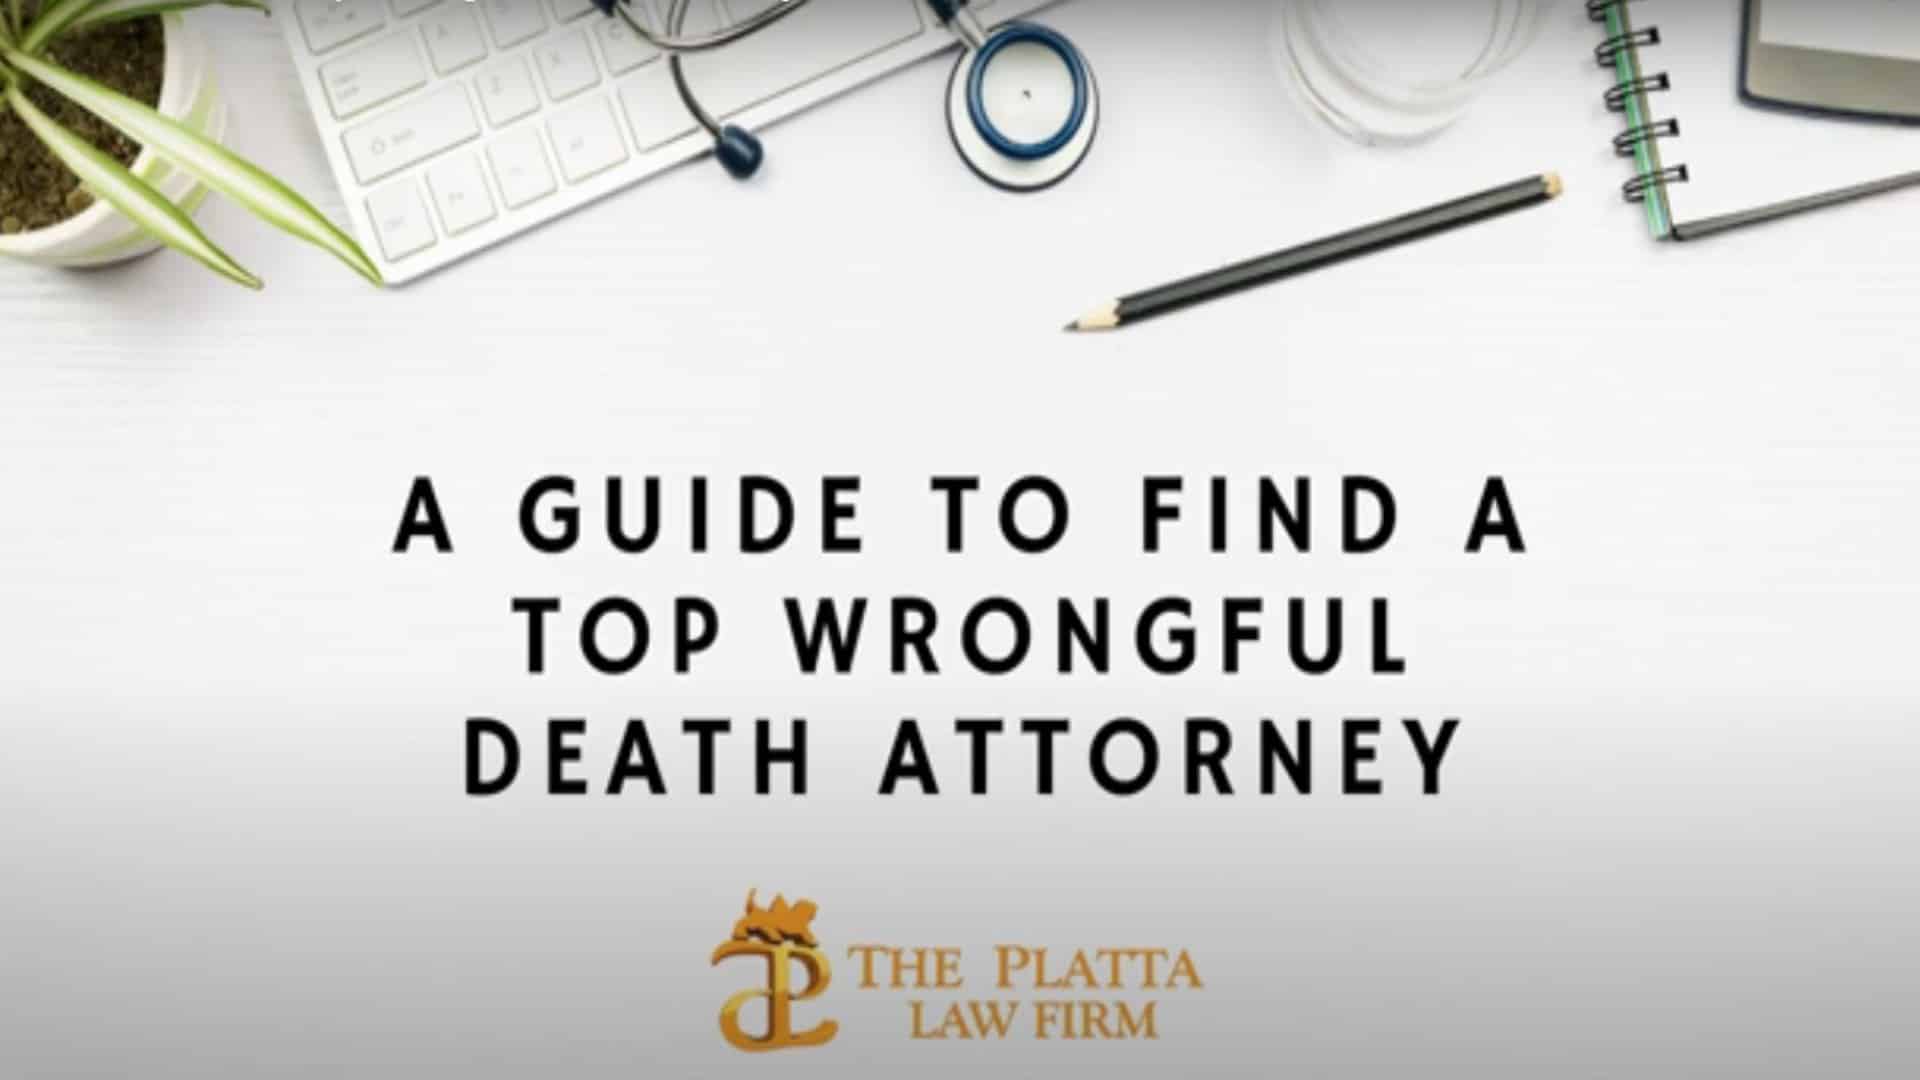 Top wrongful death attorney video